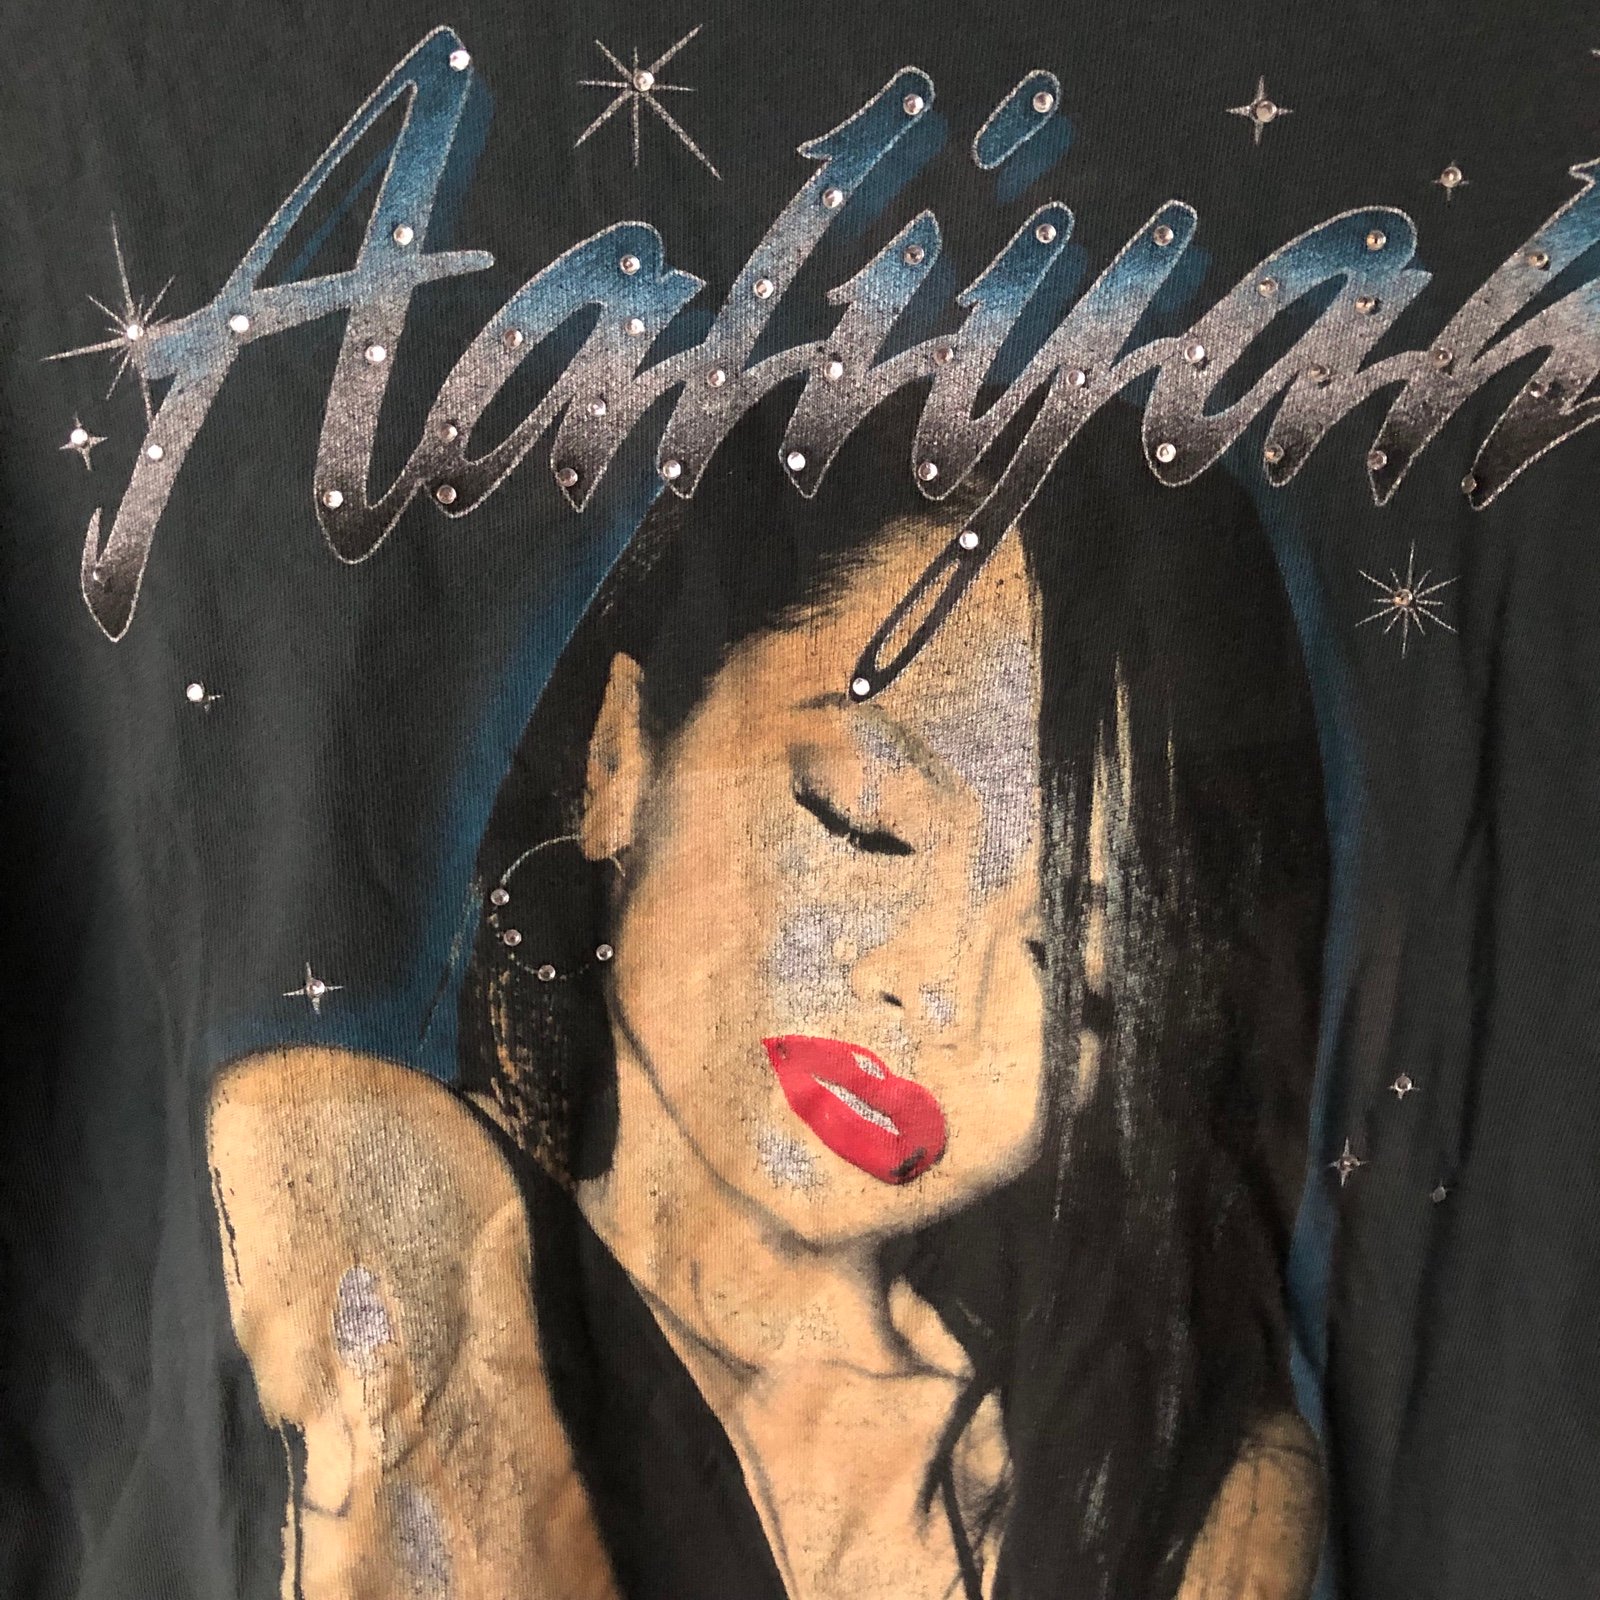 High quality Daydreamer Aaliyah One In A Million Weekend Tee in Vintage Black Size Large O0qWNmnlU for sale